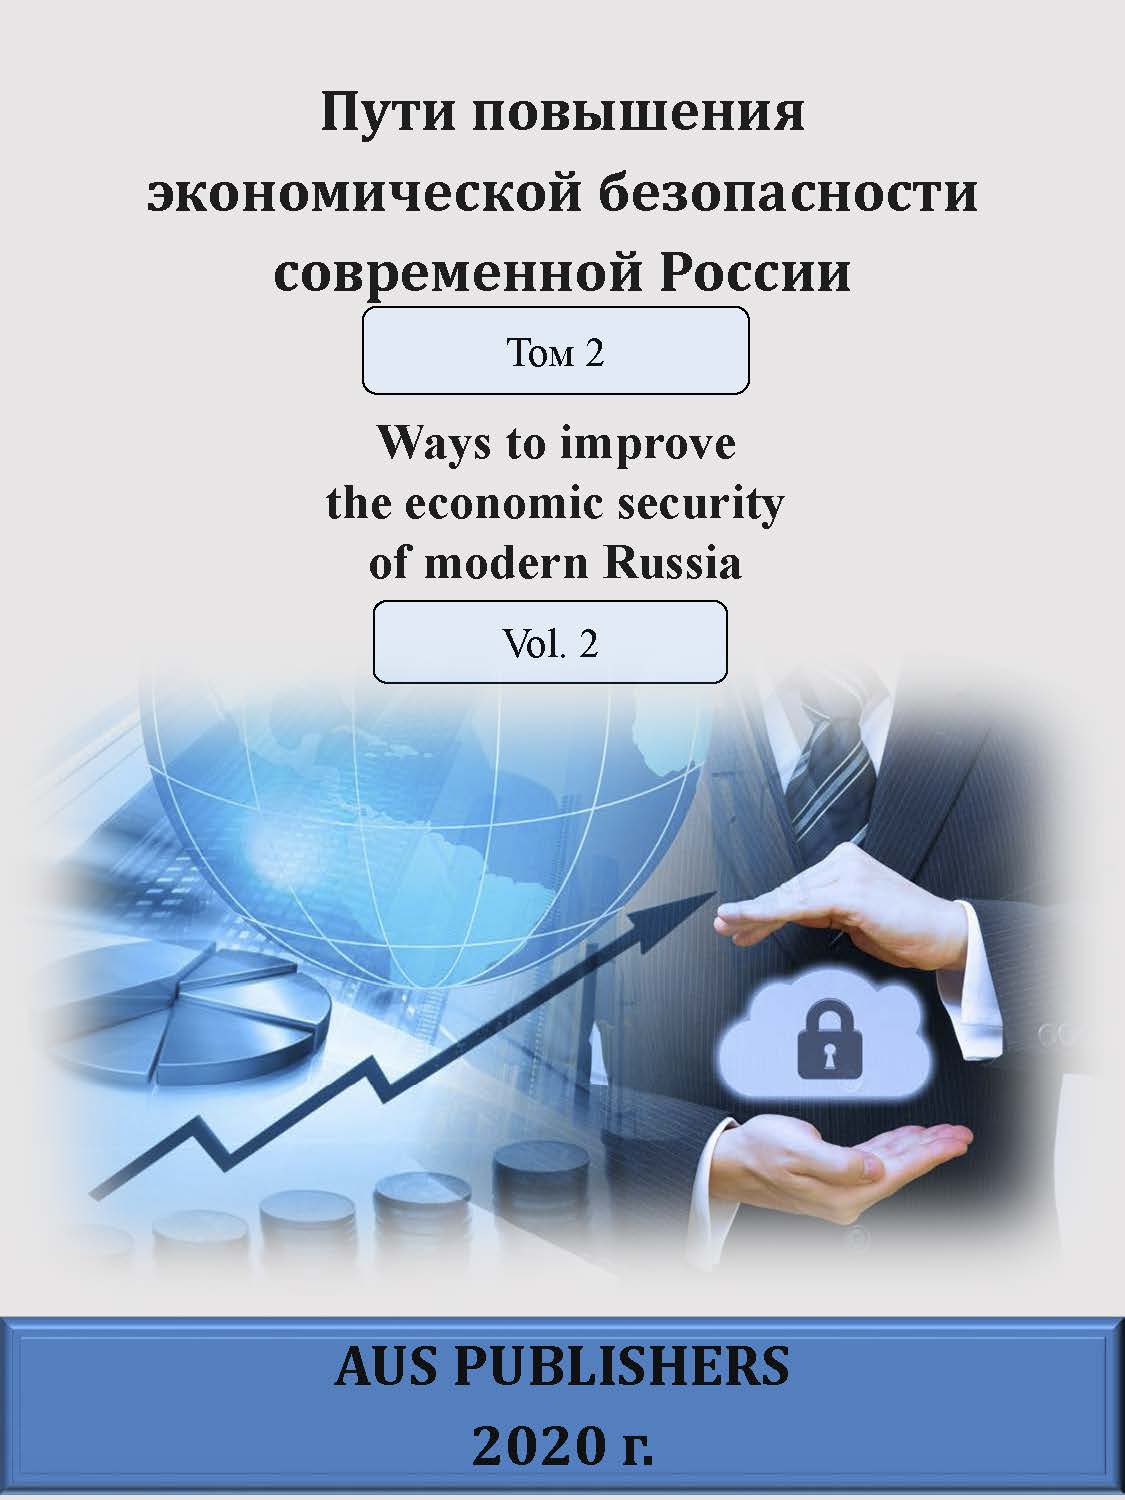                         WAYS TO IMPROVE THE ECONOMIC SECURITY OF MODERN RUSSIA. VOL.2
            